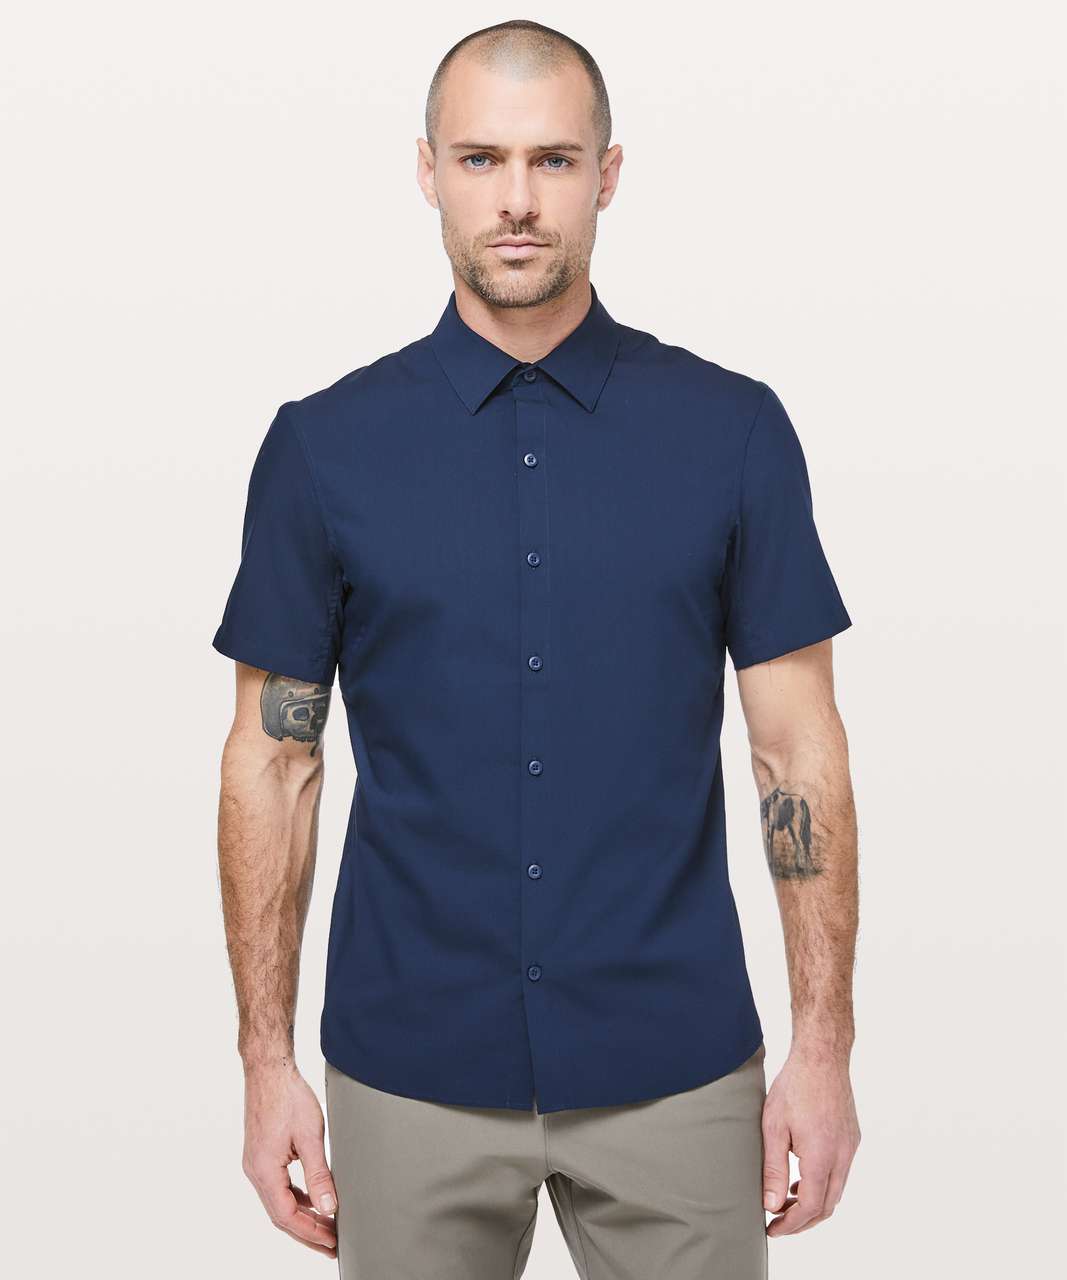 Lululemon Down To The Wire Short Sleeve Shirt - True Navy